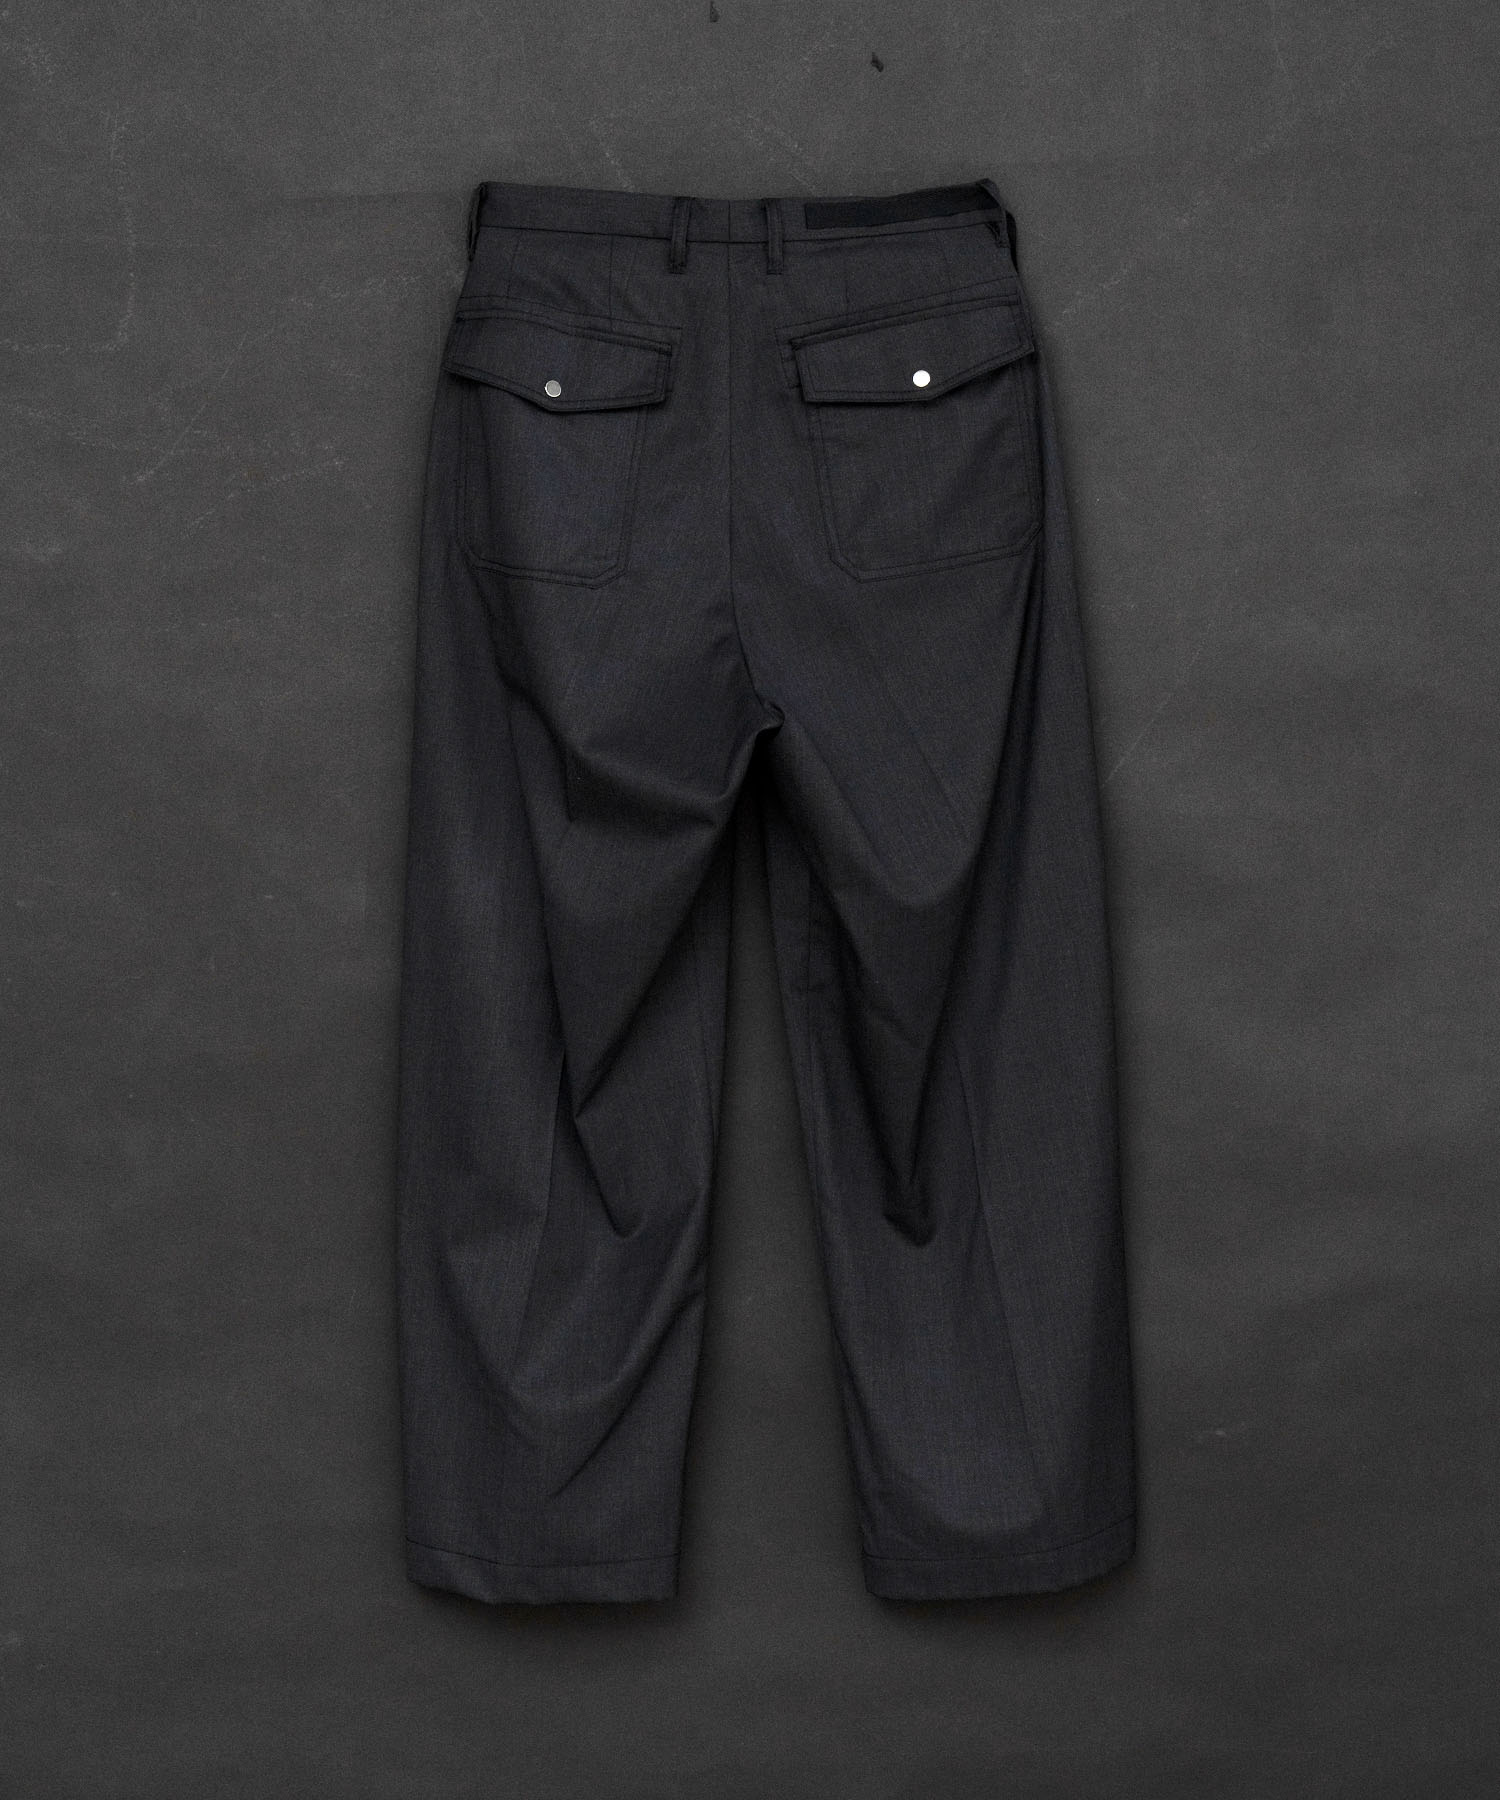 T/W Stretch Italian Army Motorcycle Pants